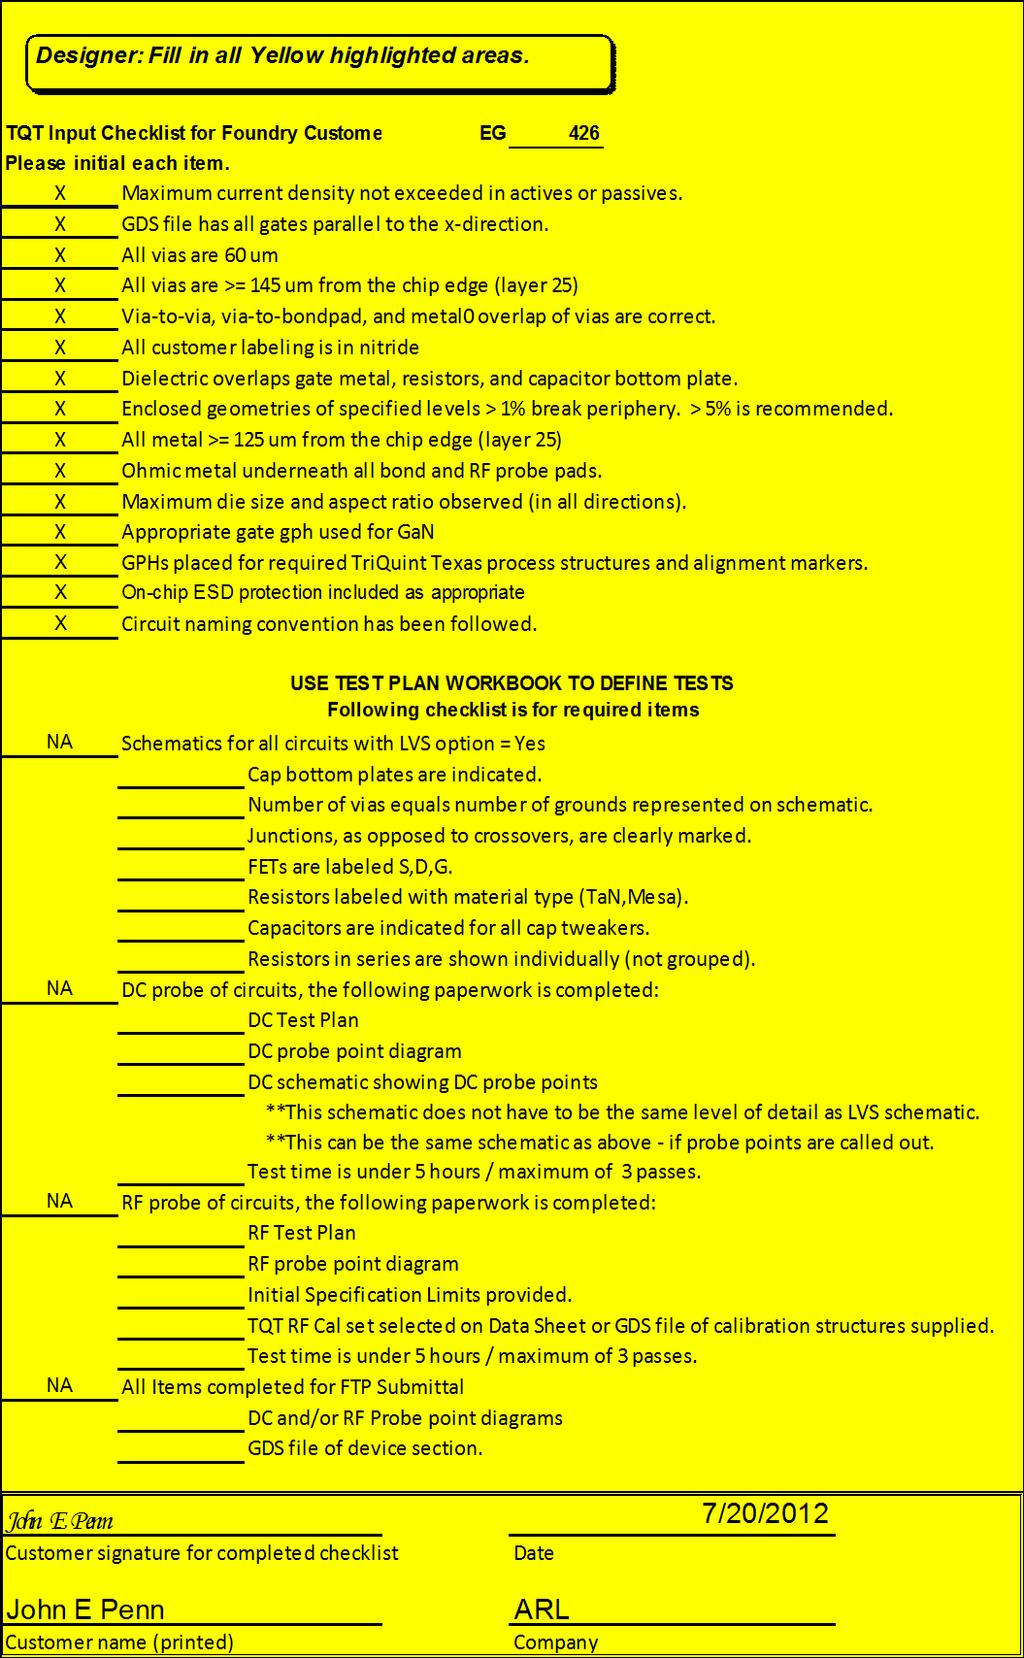 Designer: Fill in all Yellow highlighted areas. TQT Input Checklist for Foundry Custome Please initial each item. EG 426 --- Maximum current density not exceeded in actives or passives.